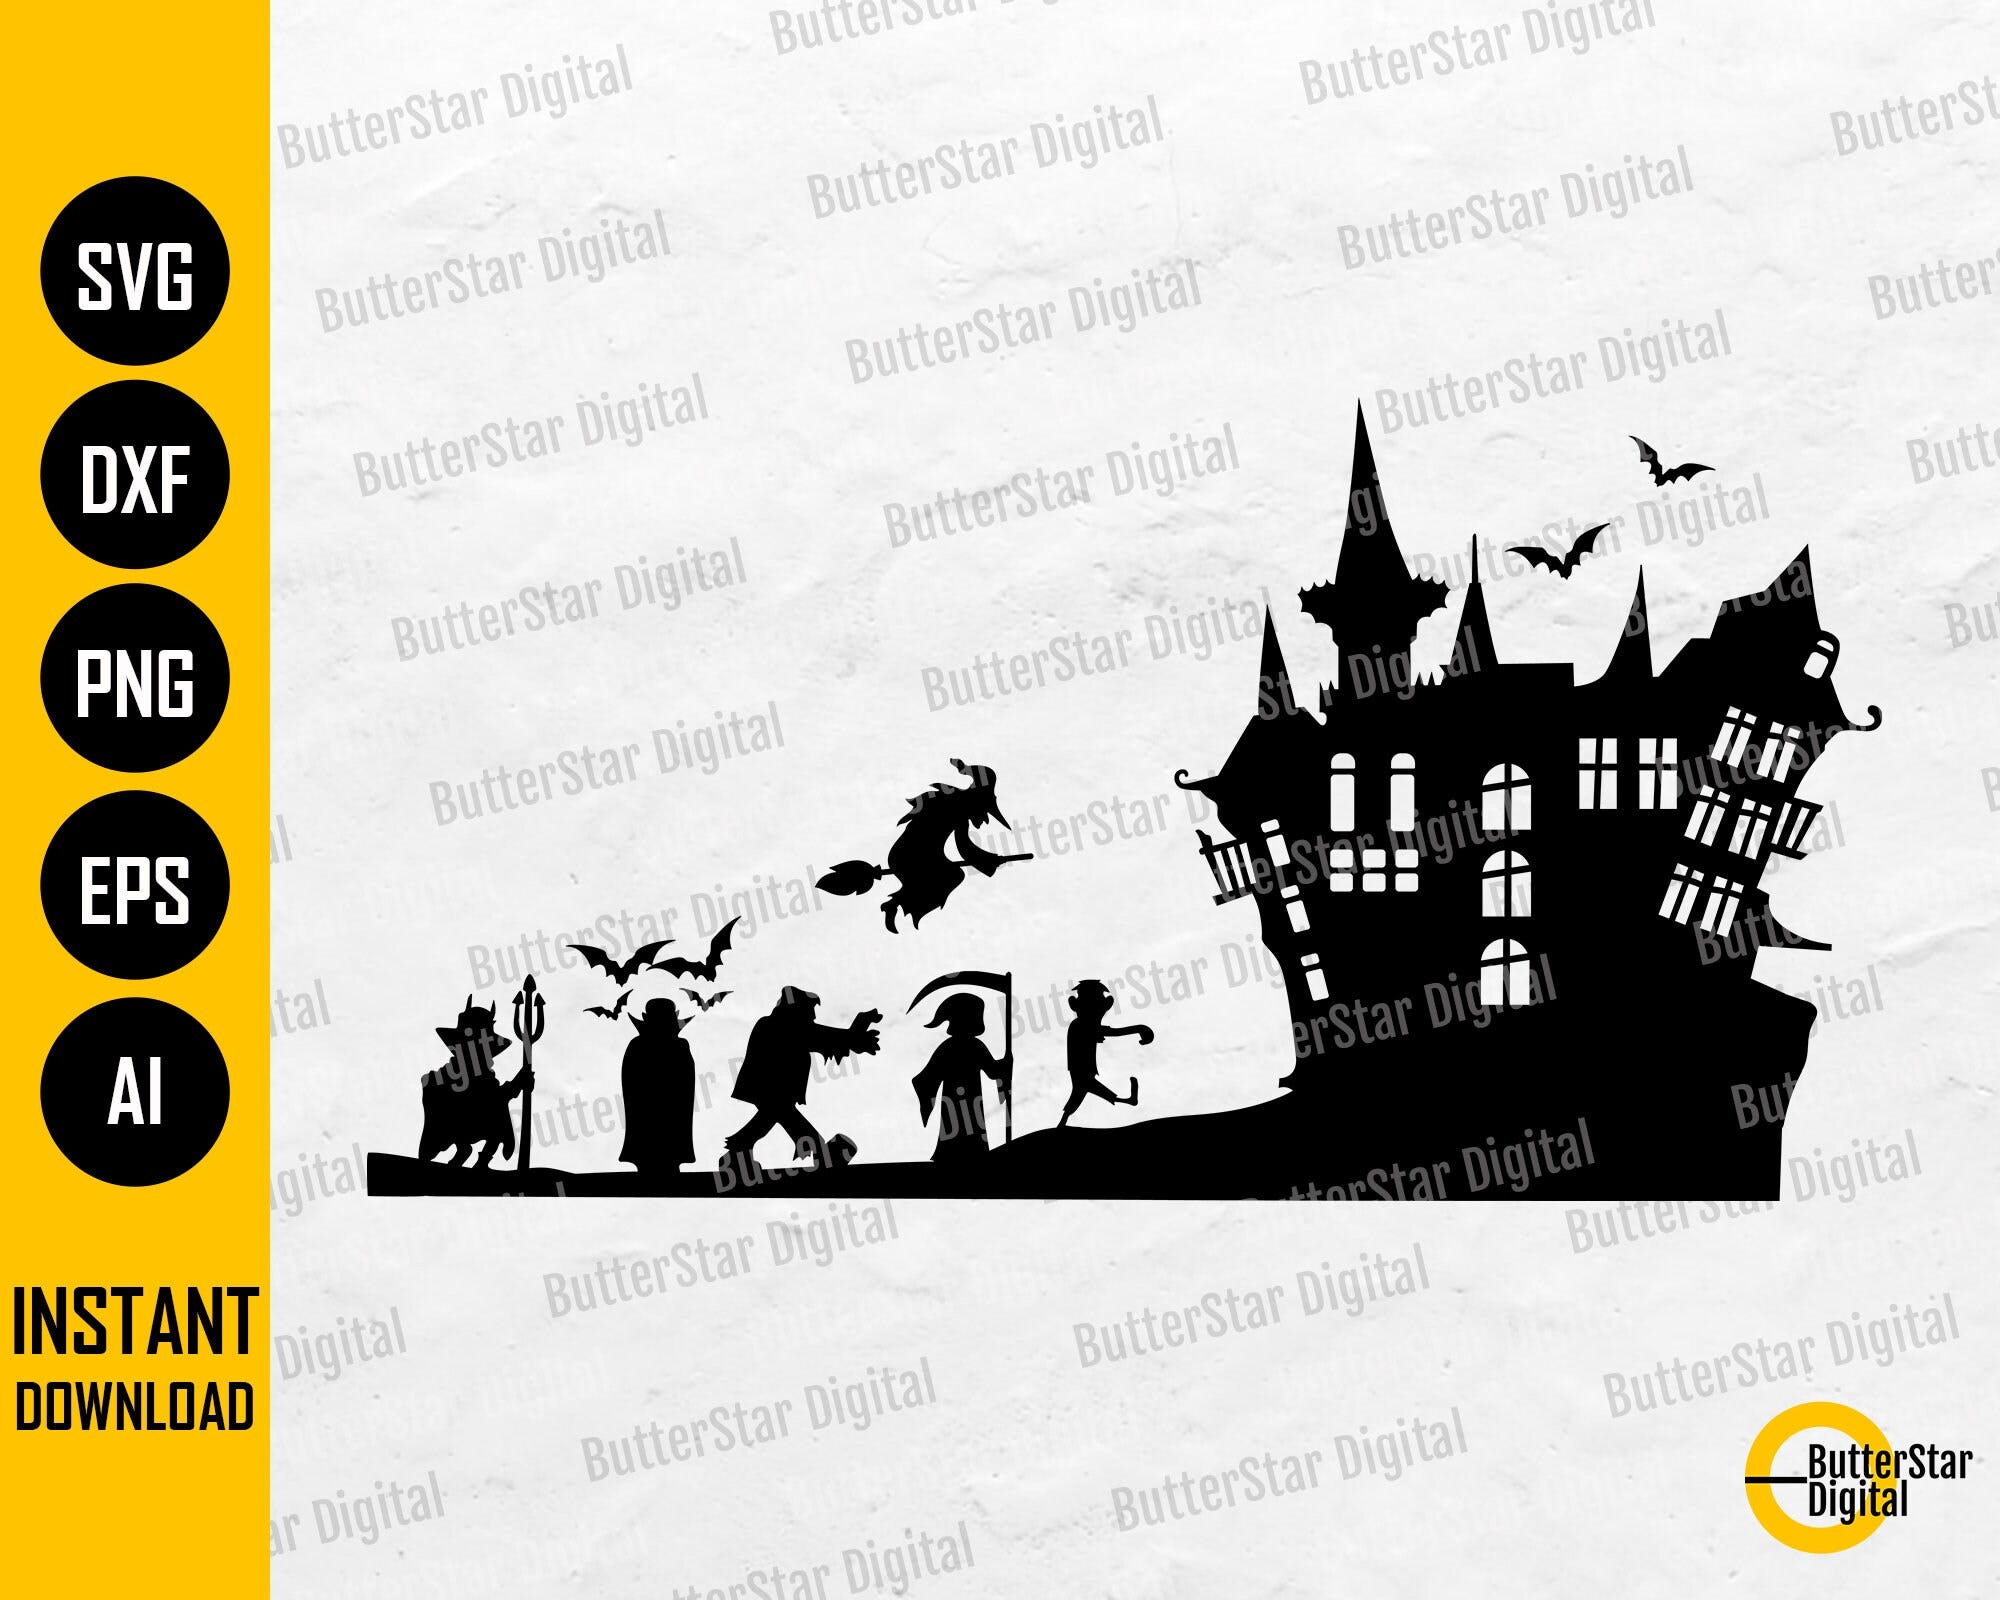 Halloween Costume Party SVG | Spooky Wall Art Decal Sticker Decoration | Cricut Cutting File Printable Clipart Vector Digital Dxf Png Eps Ai